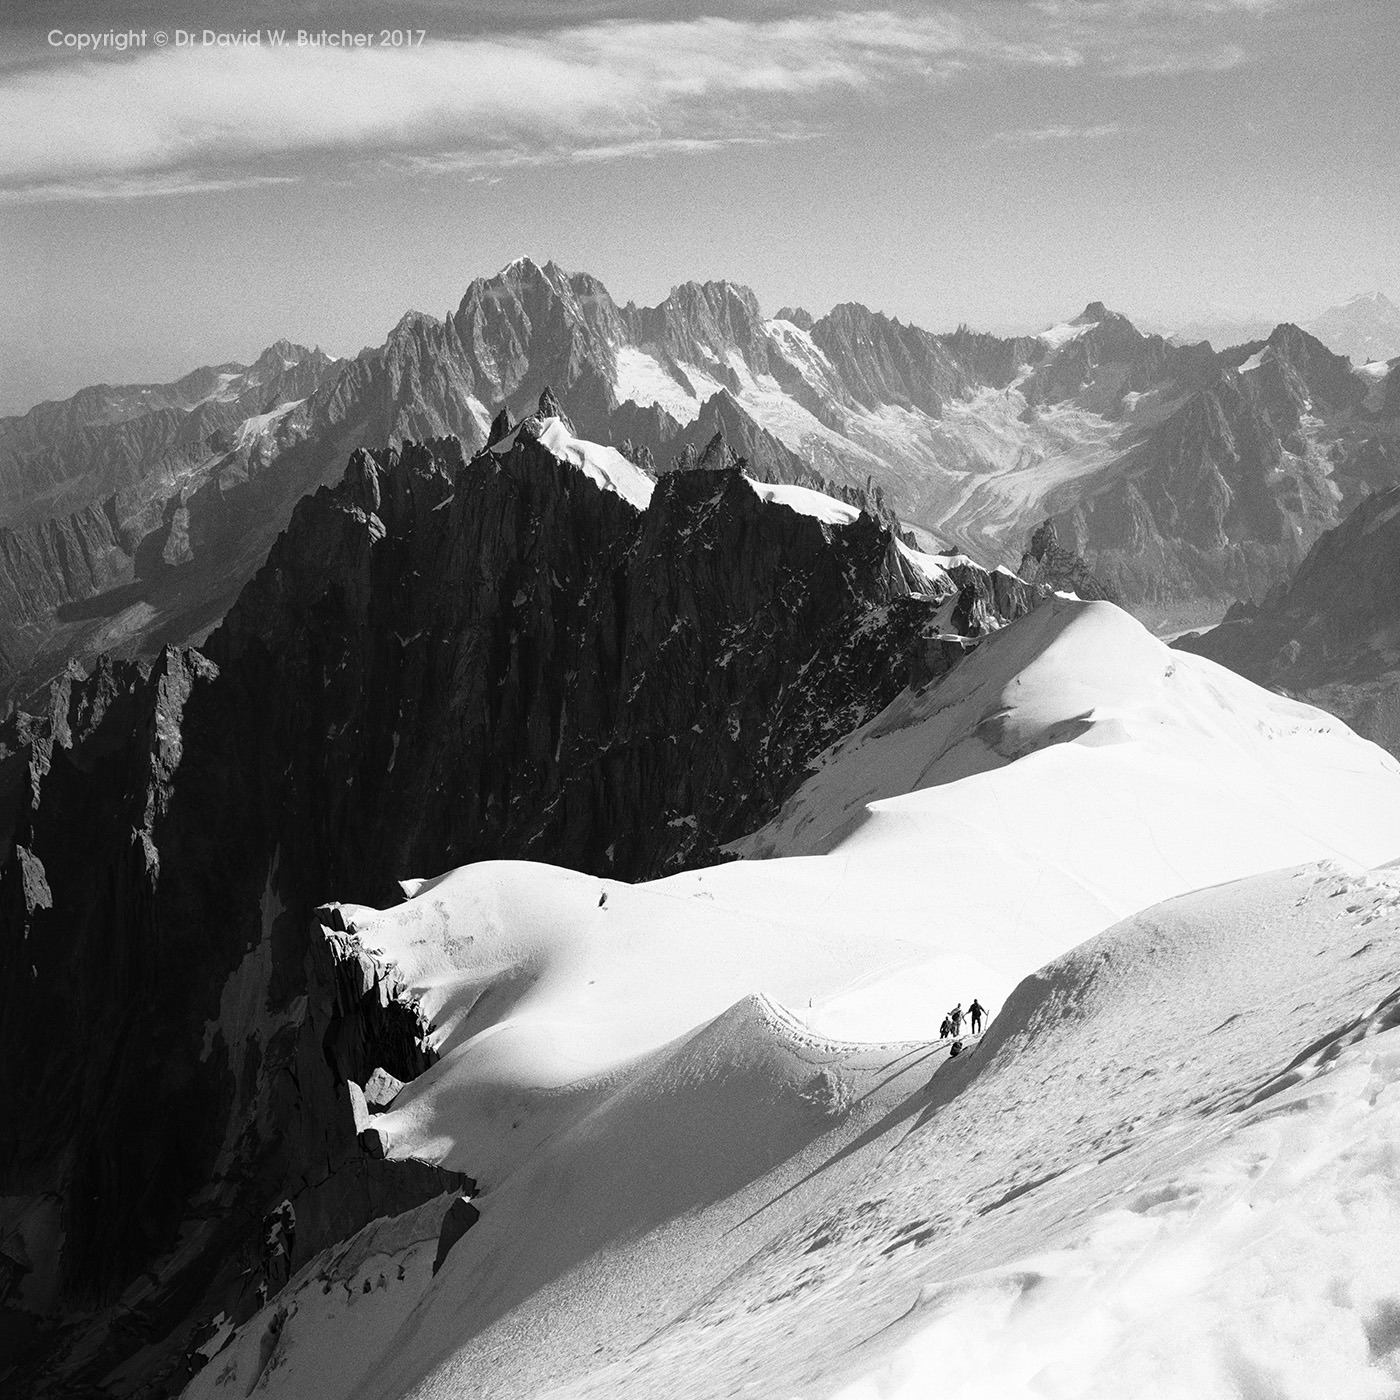 Chamonix, Descent to the Vallee Blanche, France - Dave Butcher